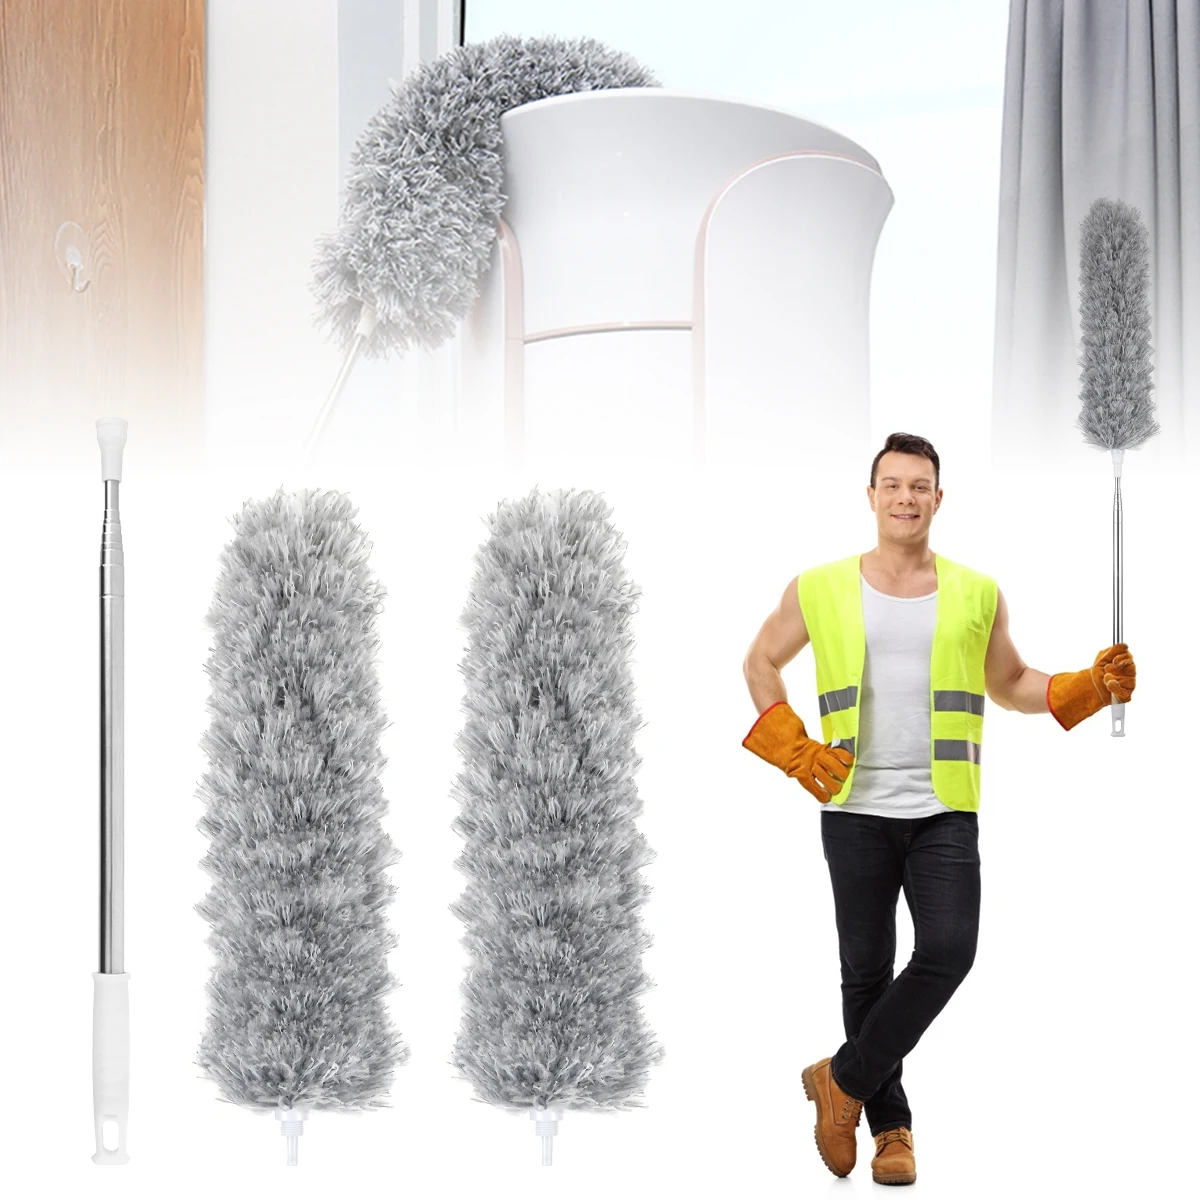 NEW Extendable Feather Duster Bendable Microfiber Duster with Stainless Steel Extension Pole Up to 110'' Washable Cobweb Brush